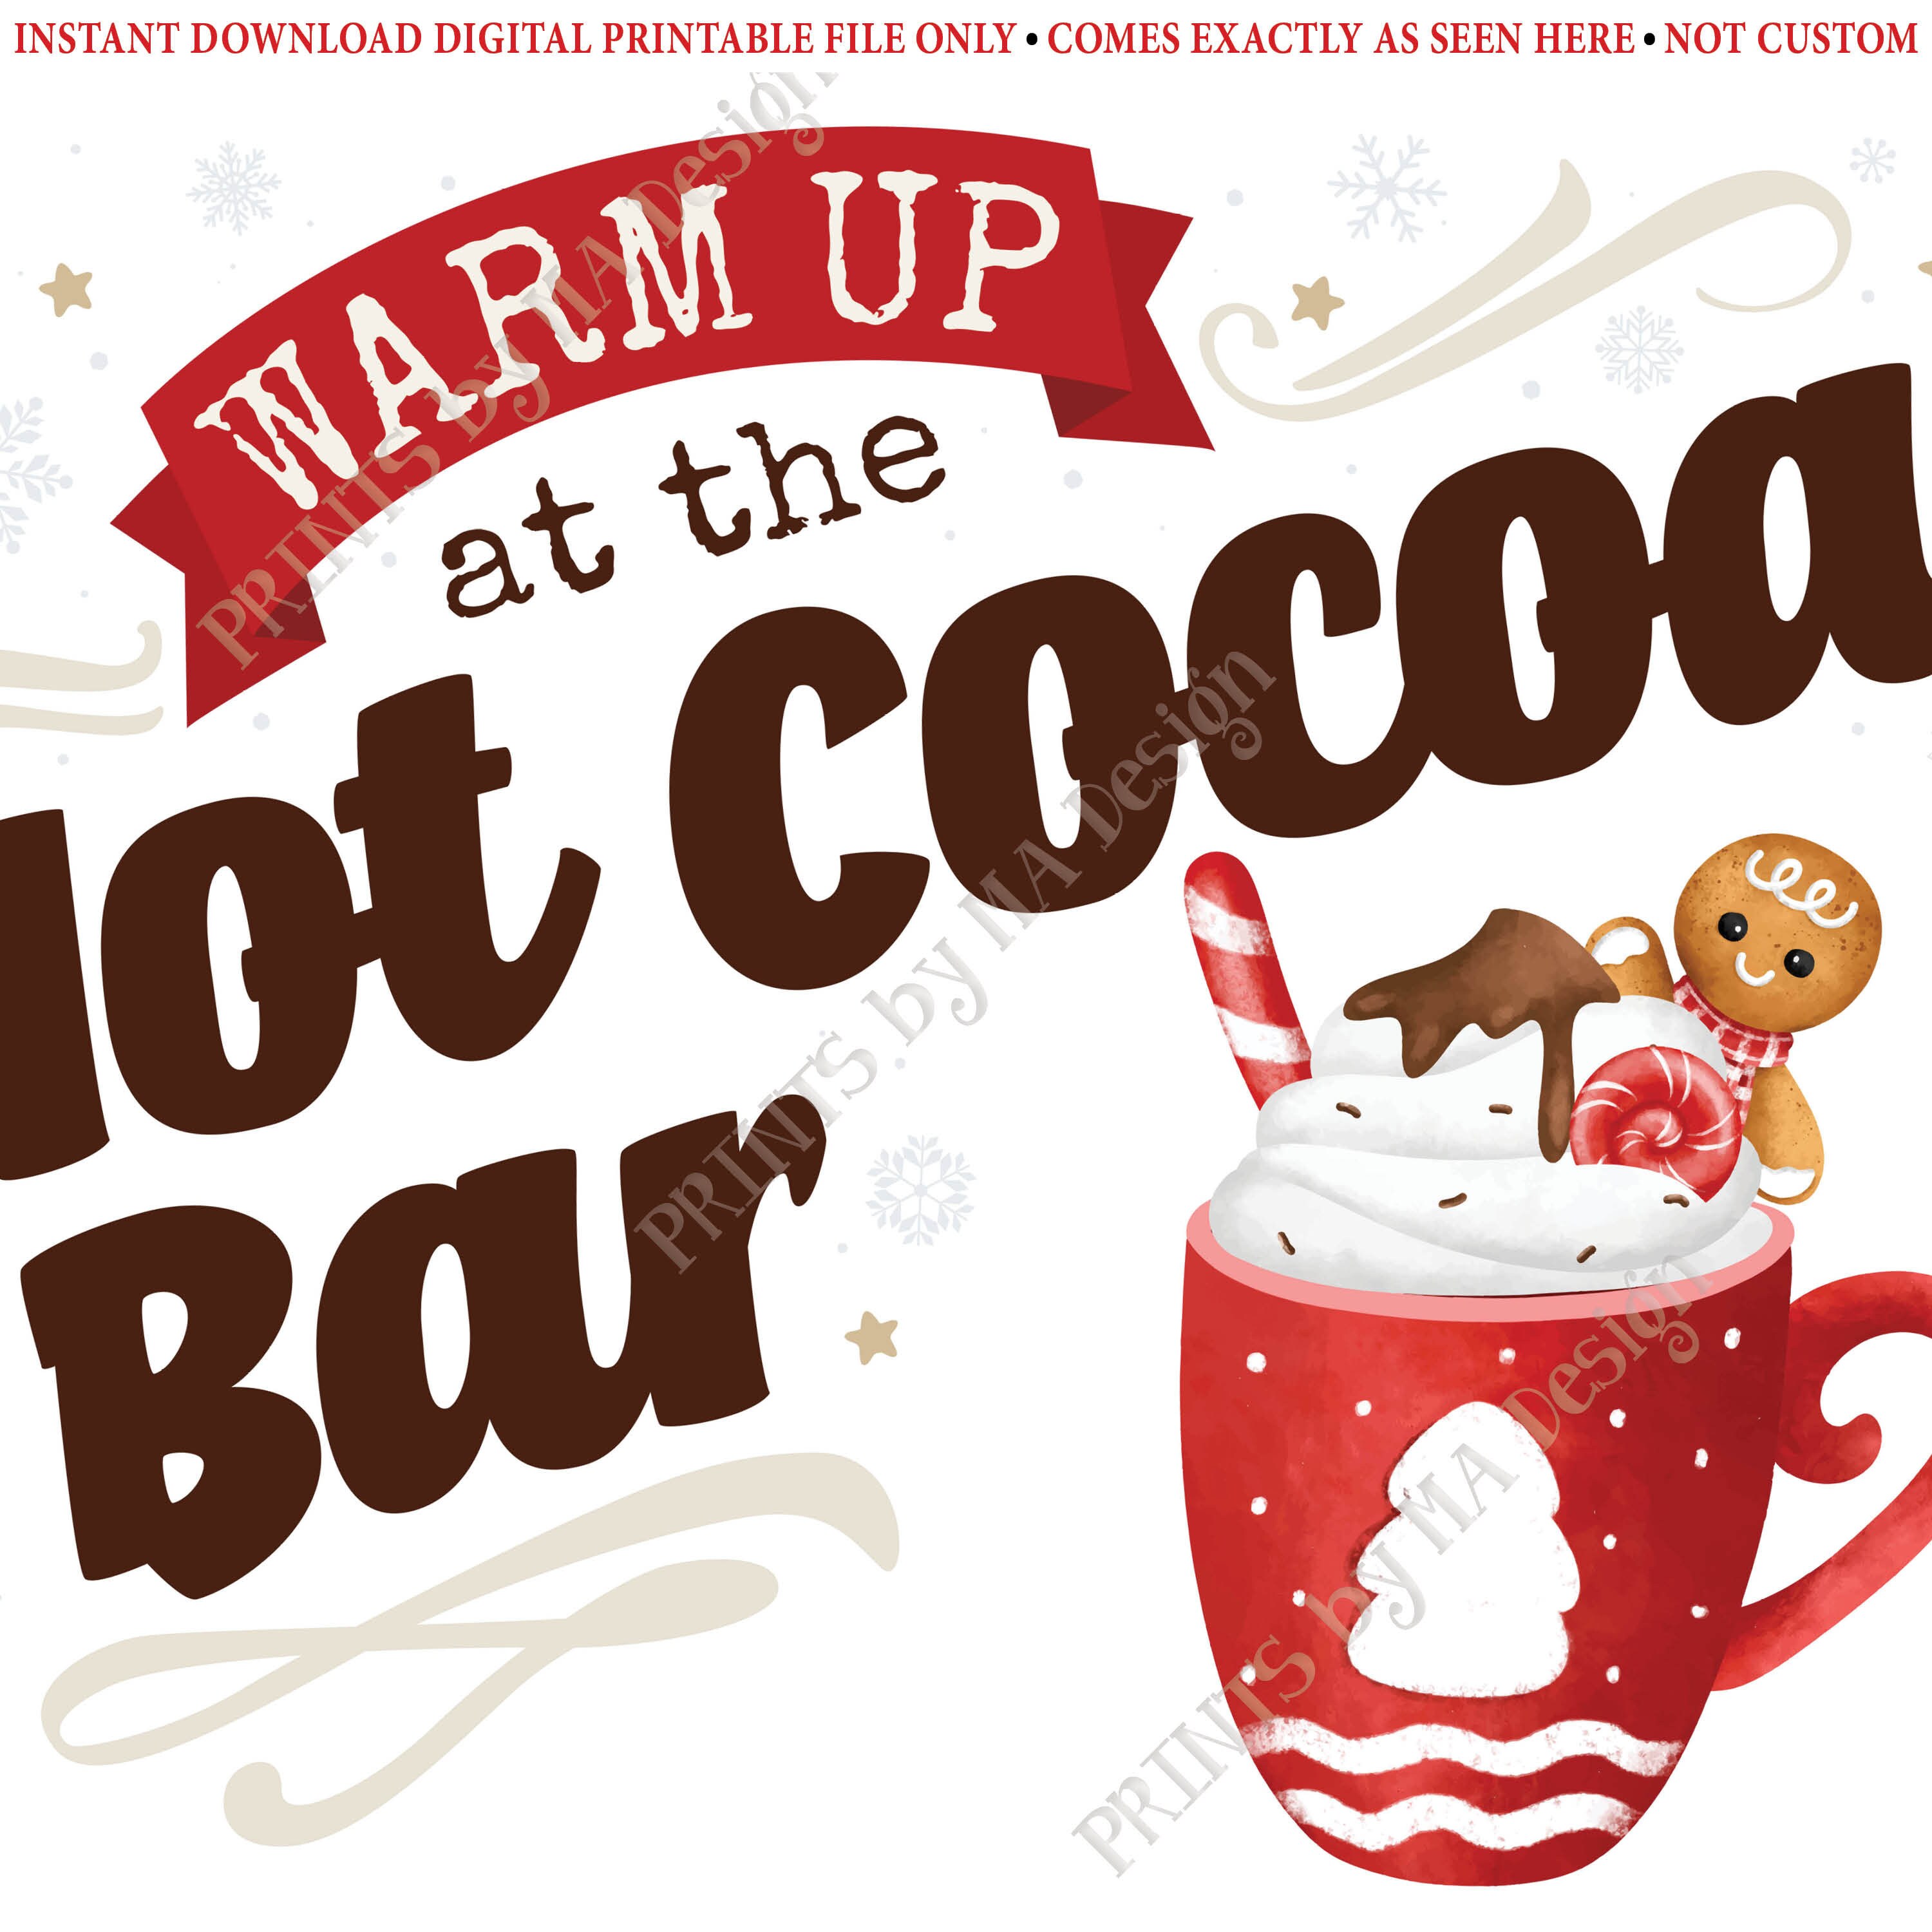 Warm Up Your Winter Holiday Party with a Hot Cocoa Bar